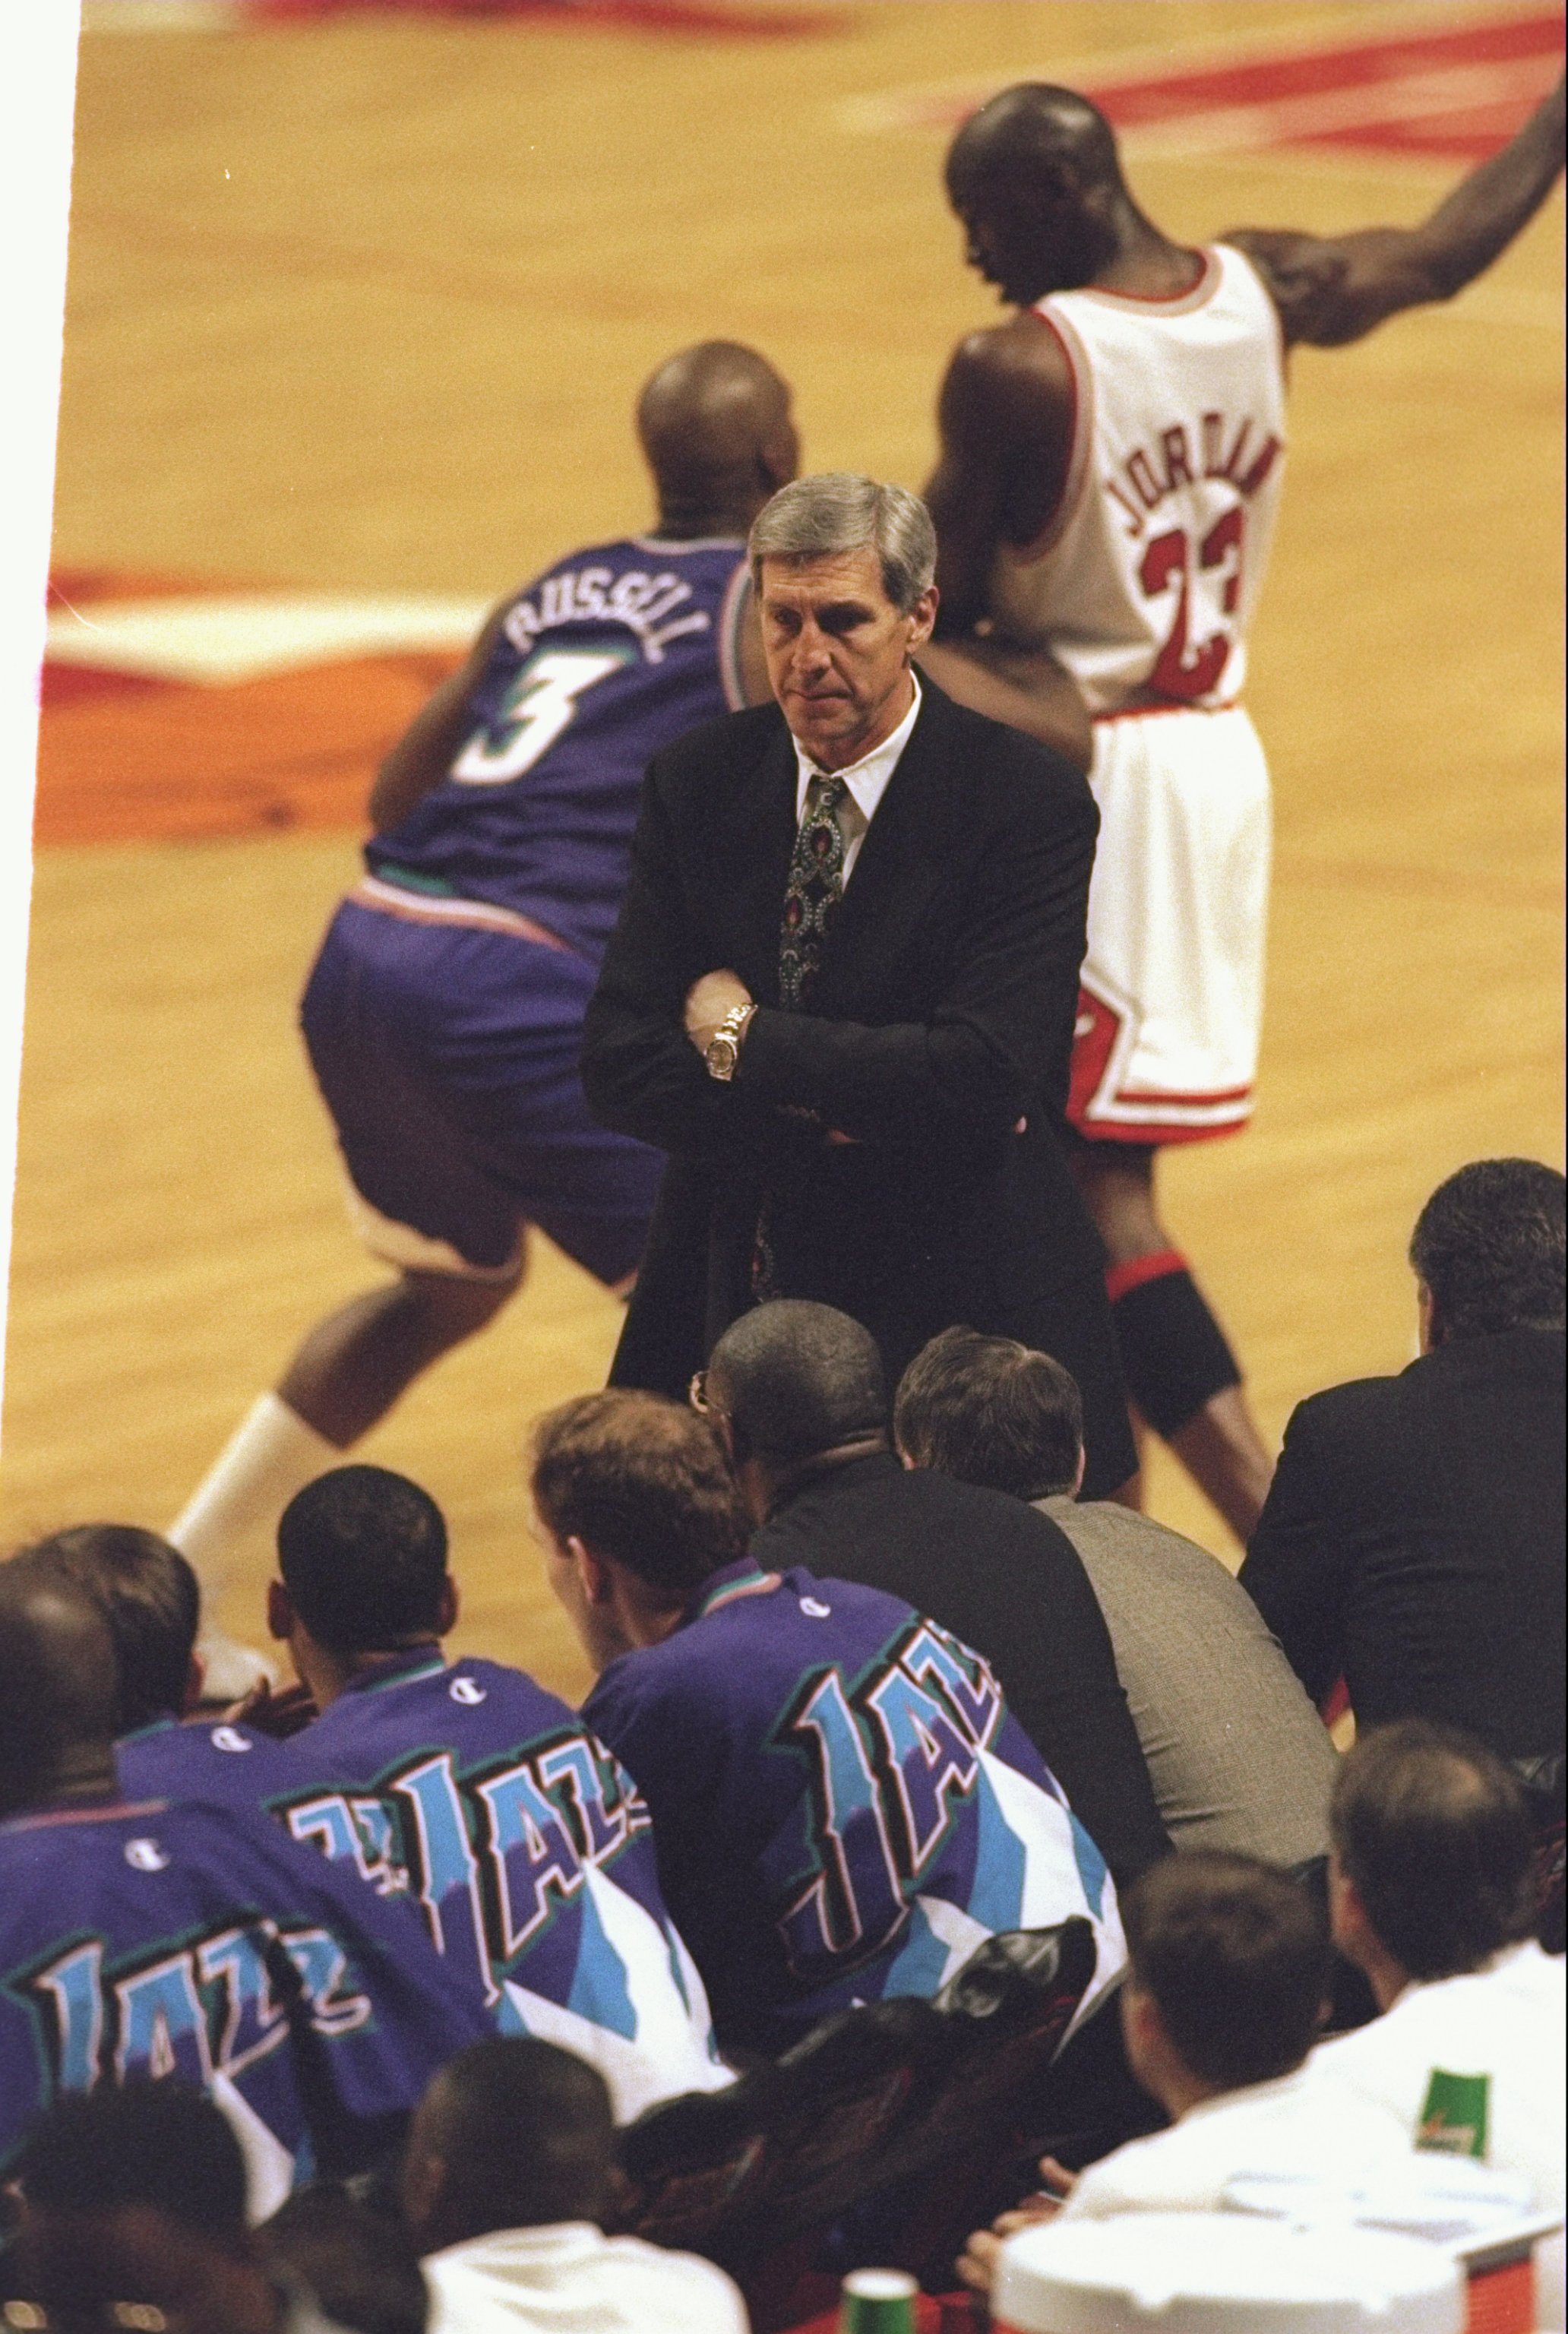 Jerry Sloan and the Top 25 NBA Coaches 